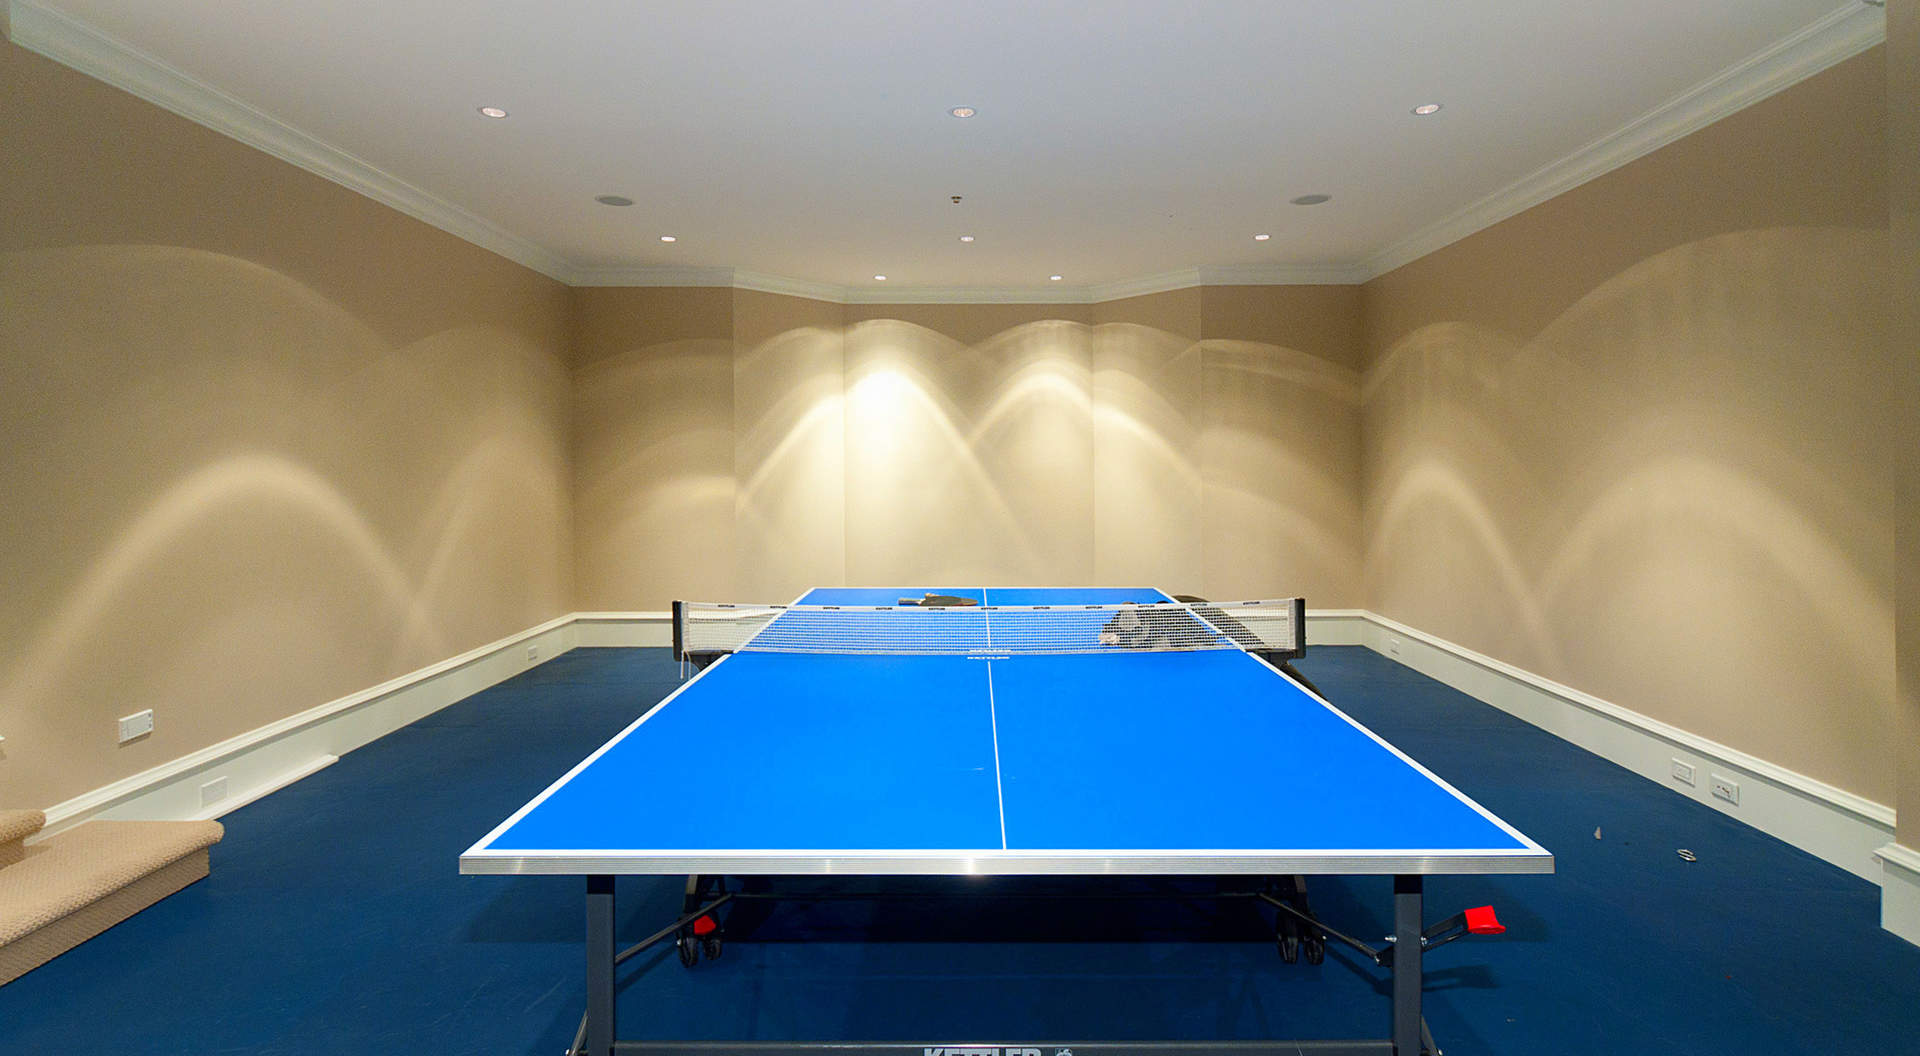 Games Room with Rubberized Flooring